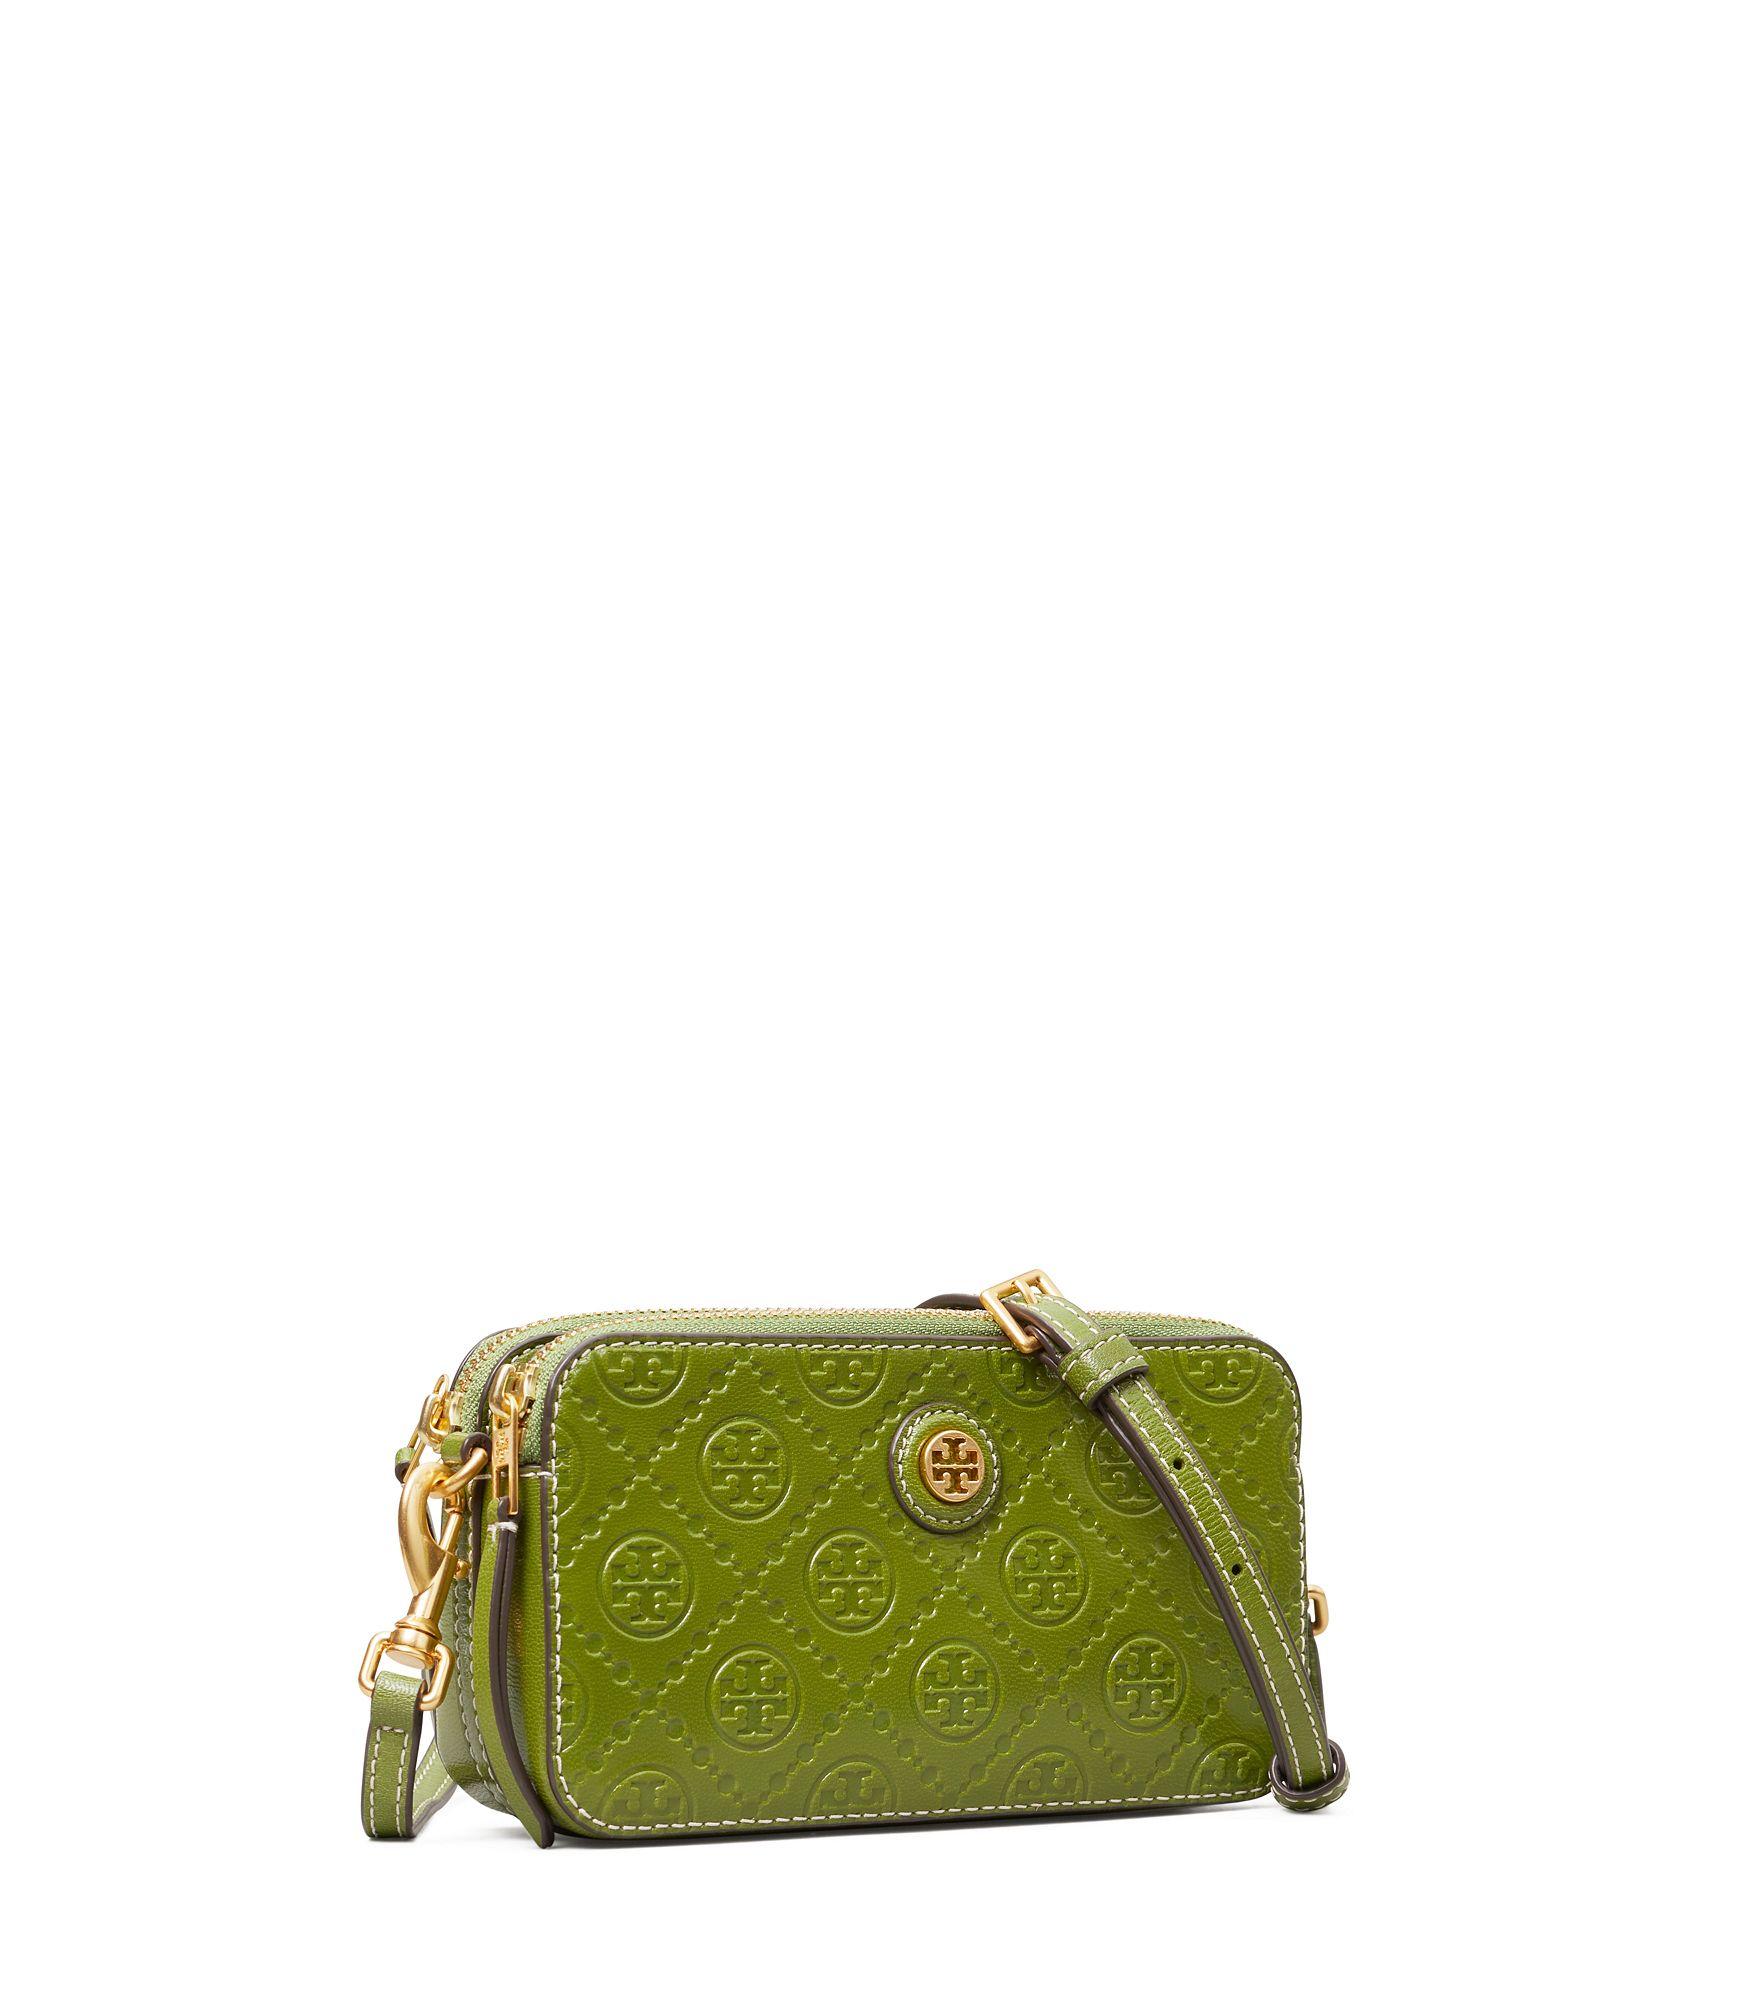 Tory Burch T Monogram Leather Double-zip Mini Bag in Green | Lyst